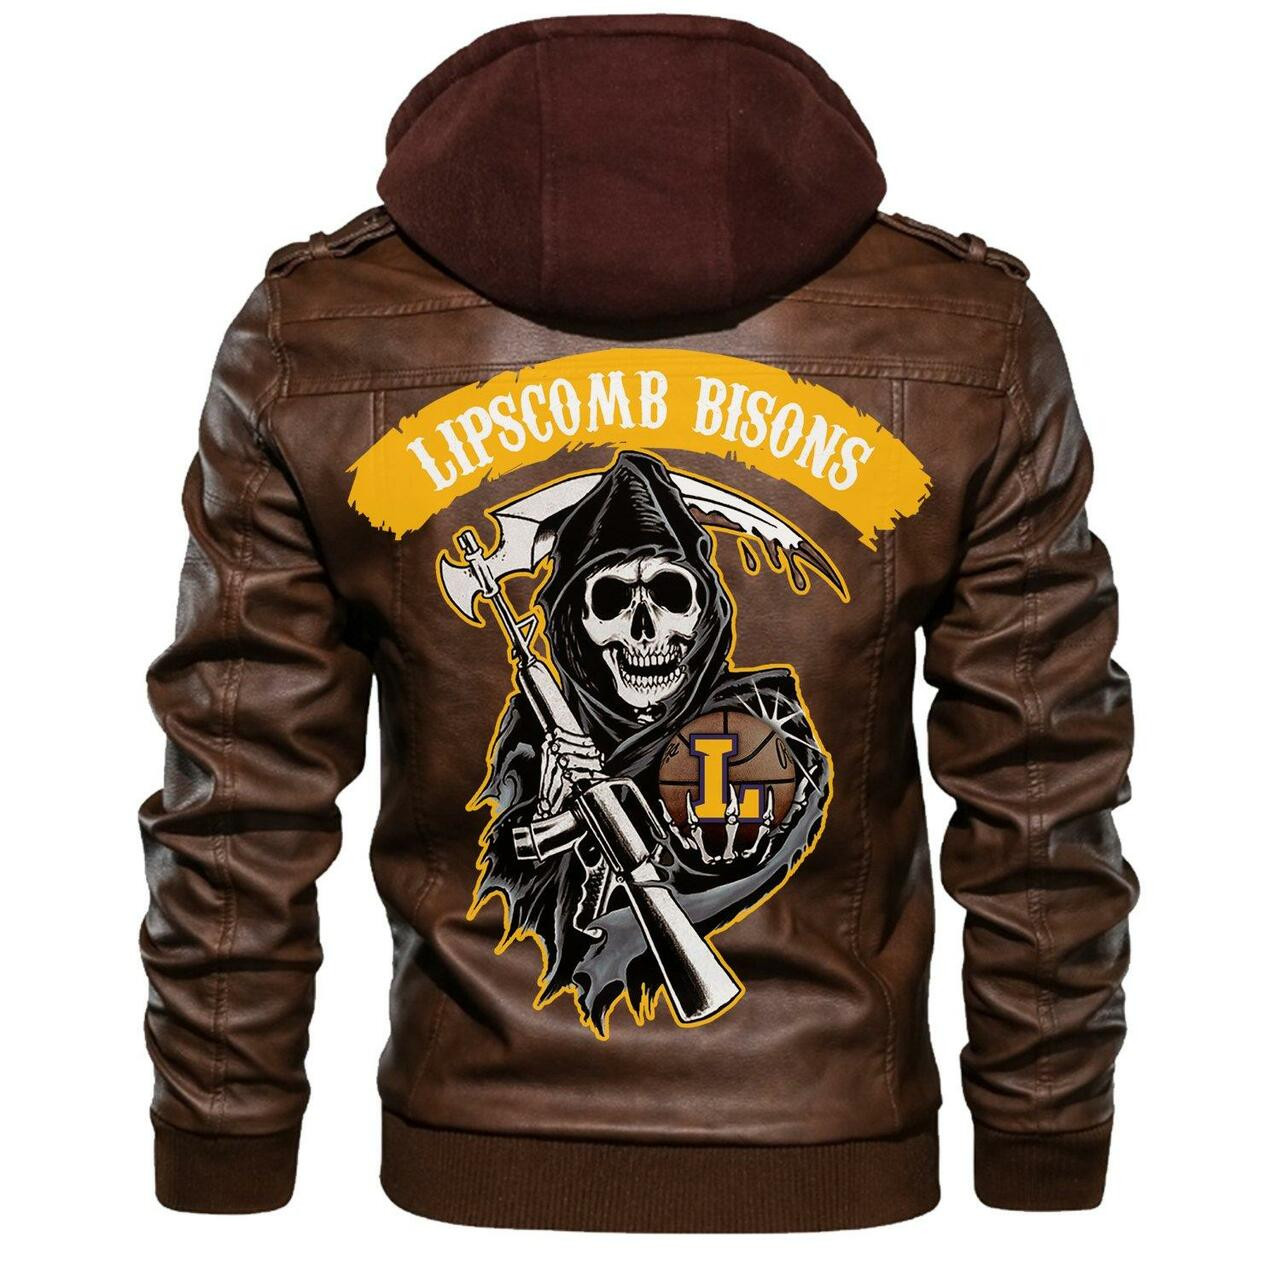 You can find Leather Jacket online at a great price 19